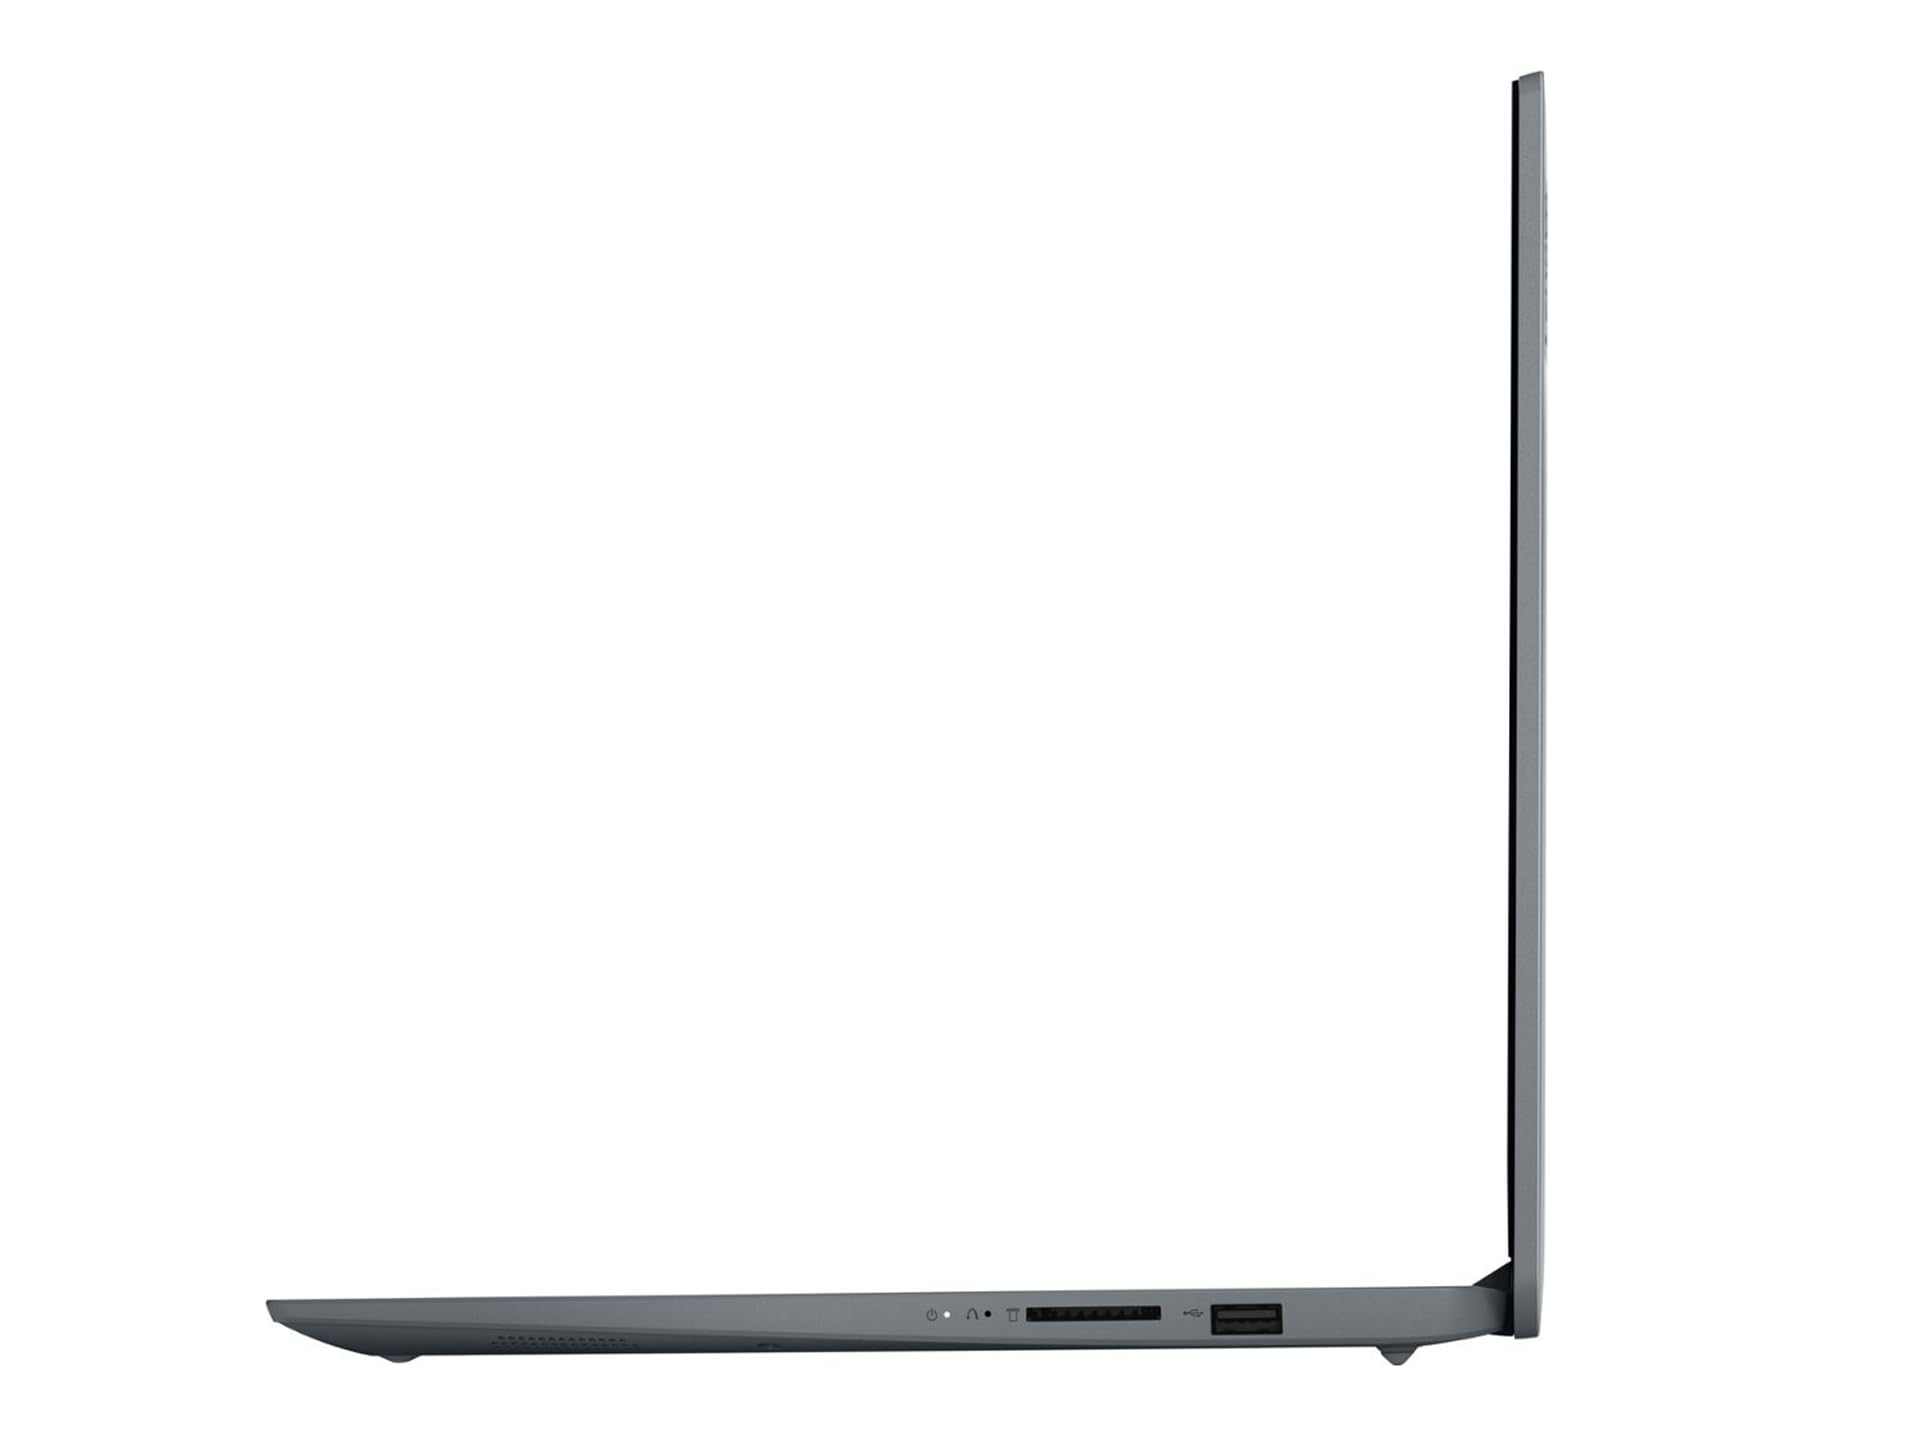 2023 Upgraded Ideapad 1 15.6'' HD Laptops for Student & Business by Lenovo, AMD Athlon Dual-Core CPU, Up to 3.5 GHz, 4GB RAM, 256GB(128GB SSD+128GB Card), USB-C, Wi-Fi 6, Windows 11, Free HDMI Cable